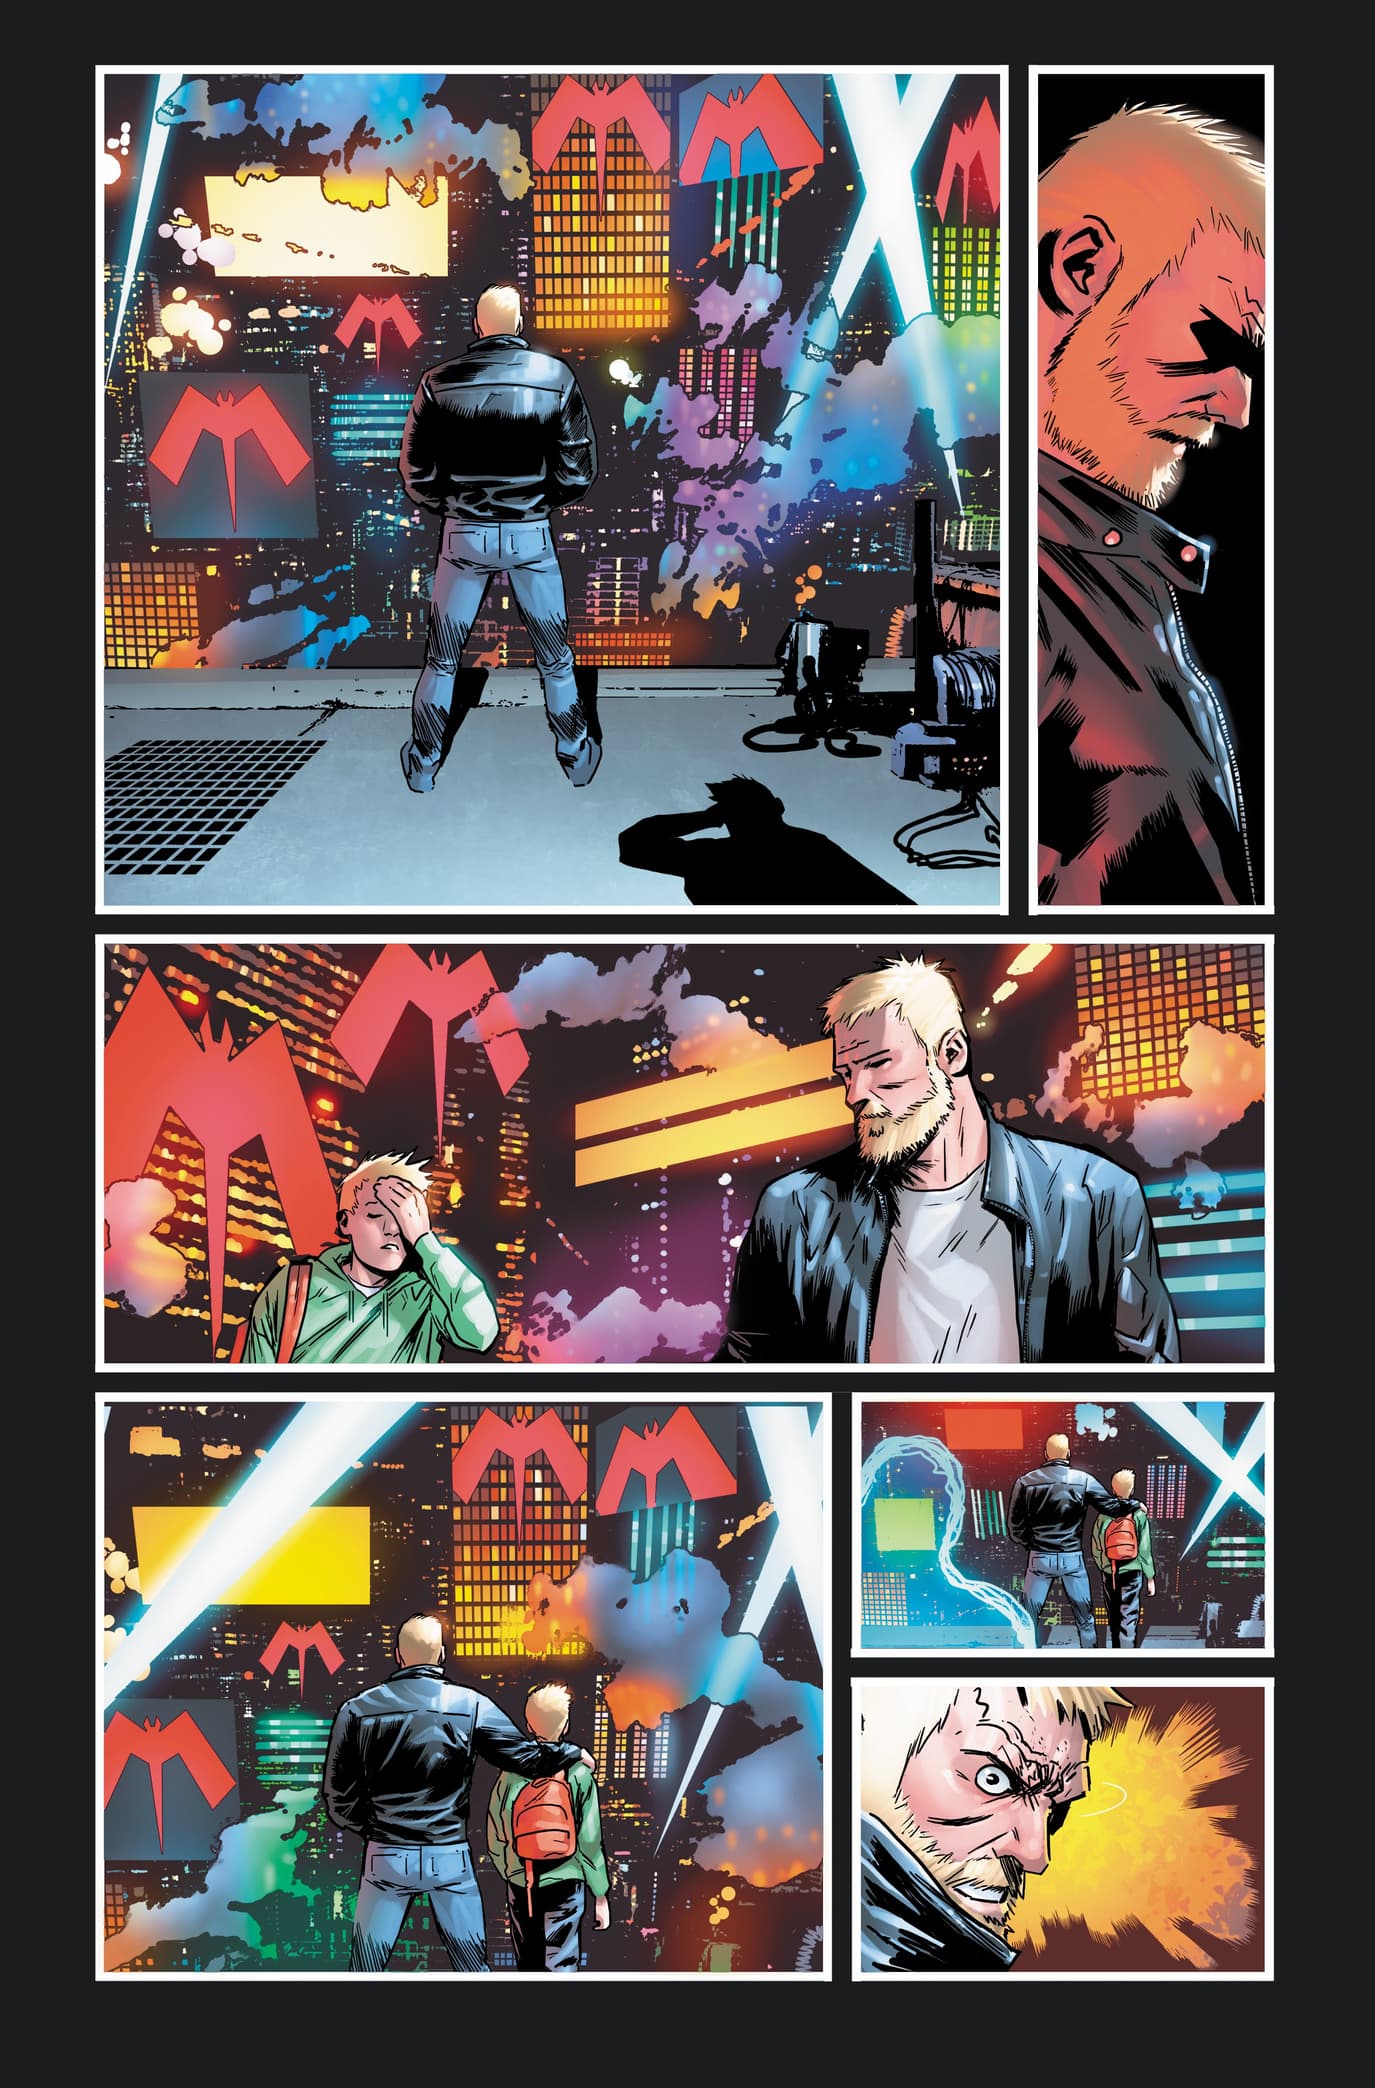 VENOM #27 preview interiors by Juan Gedeon with colors by Jesus Aburtov